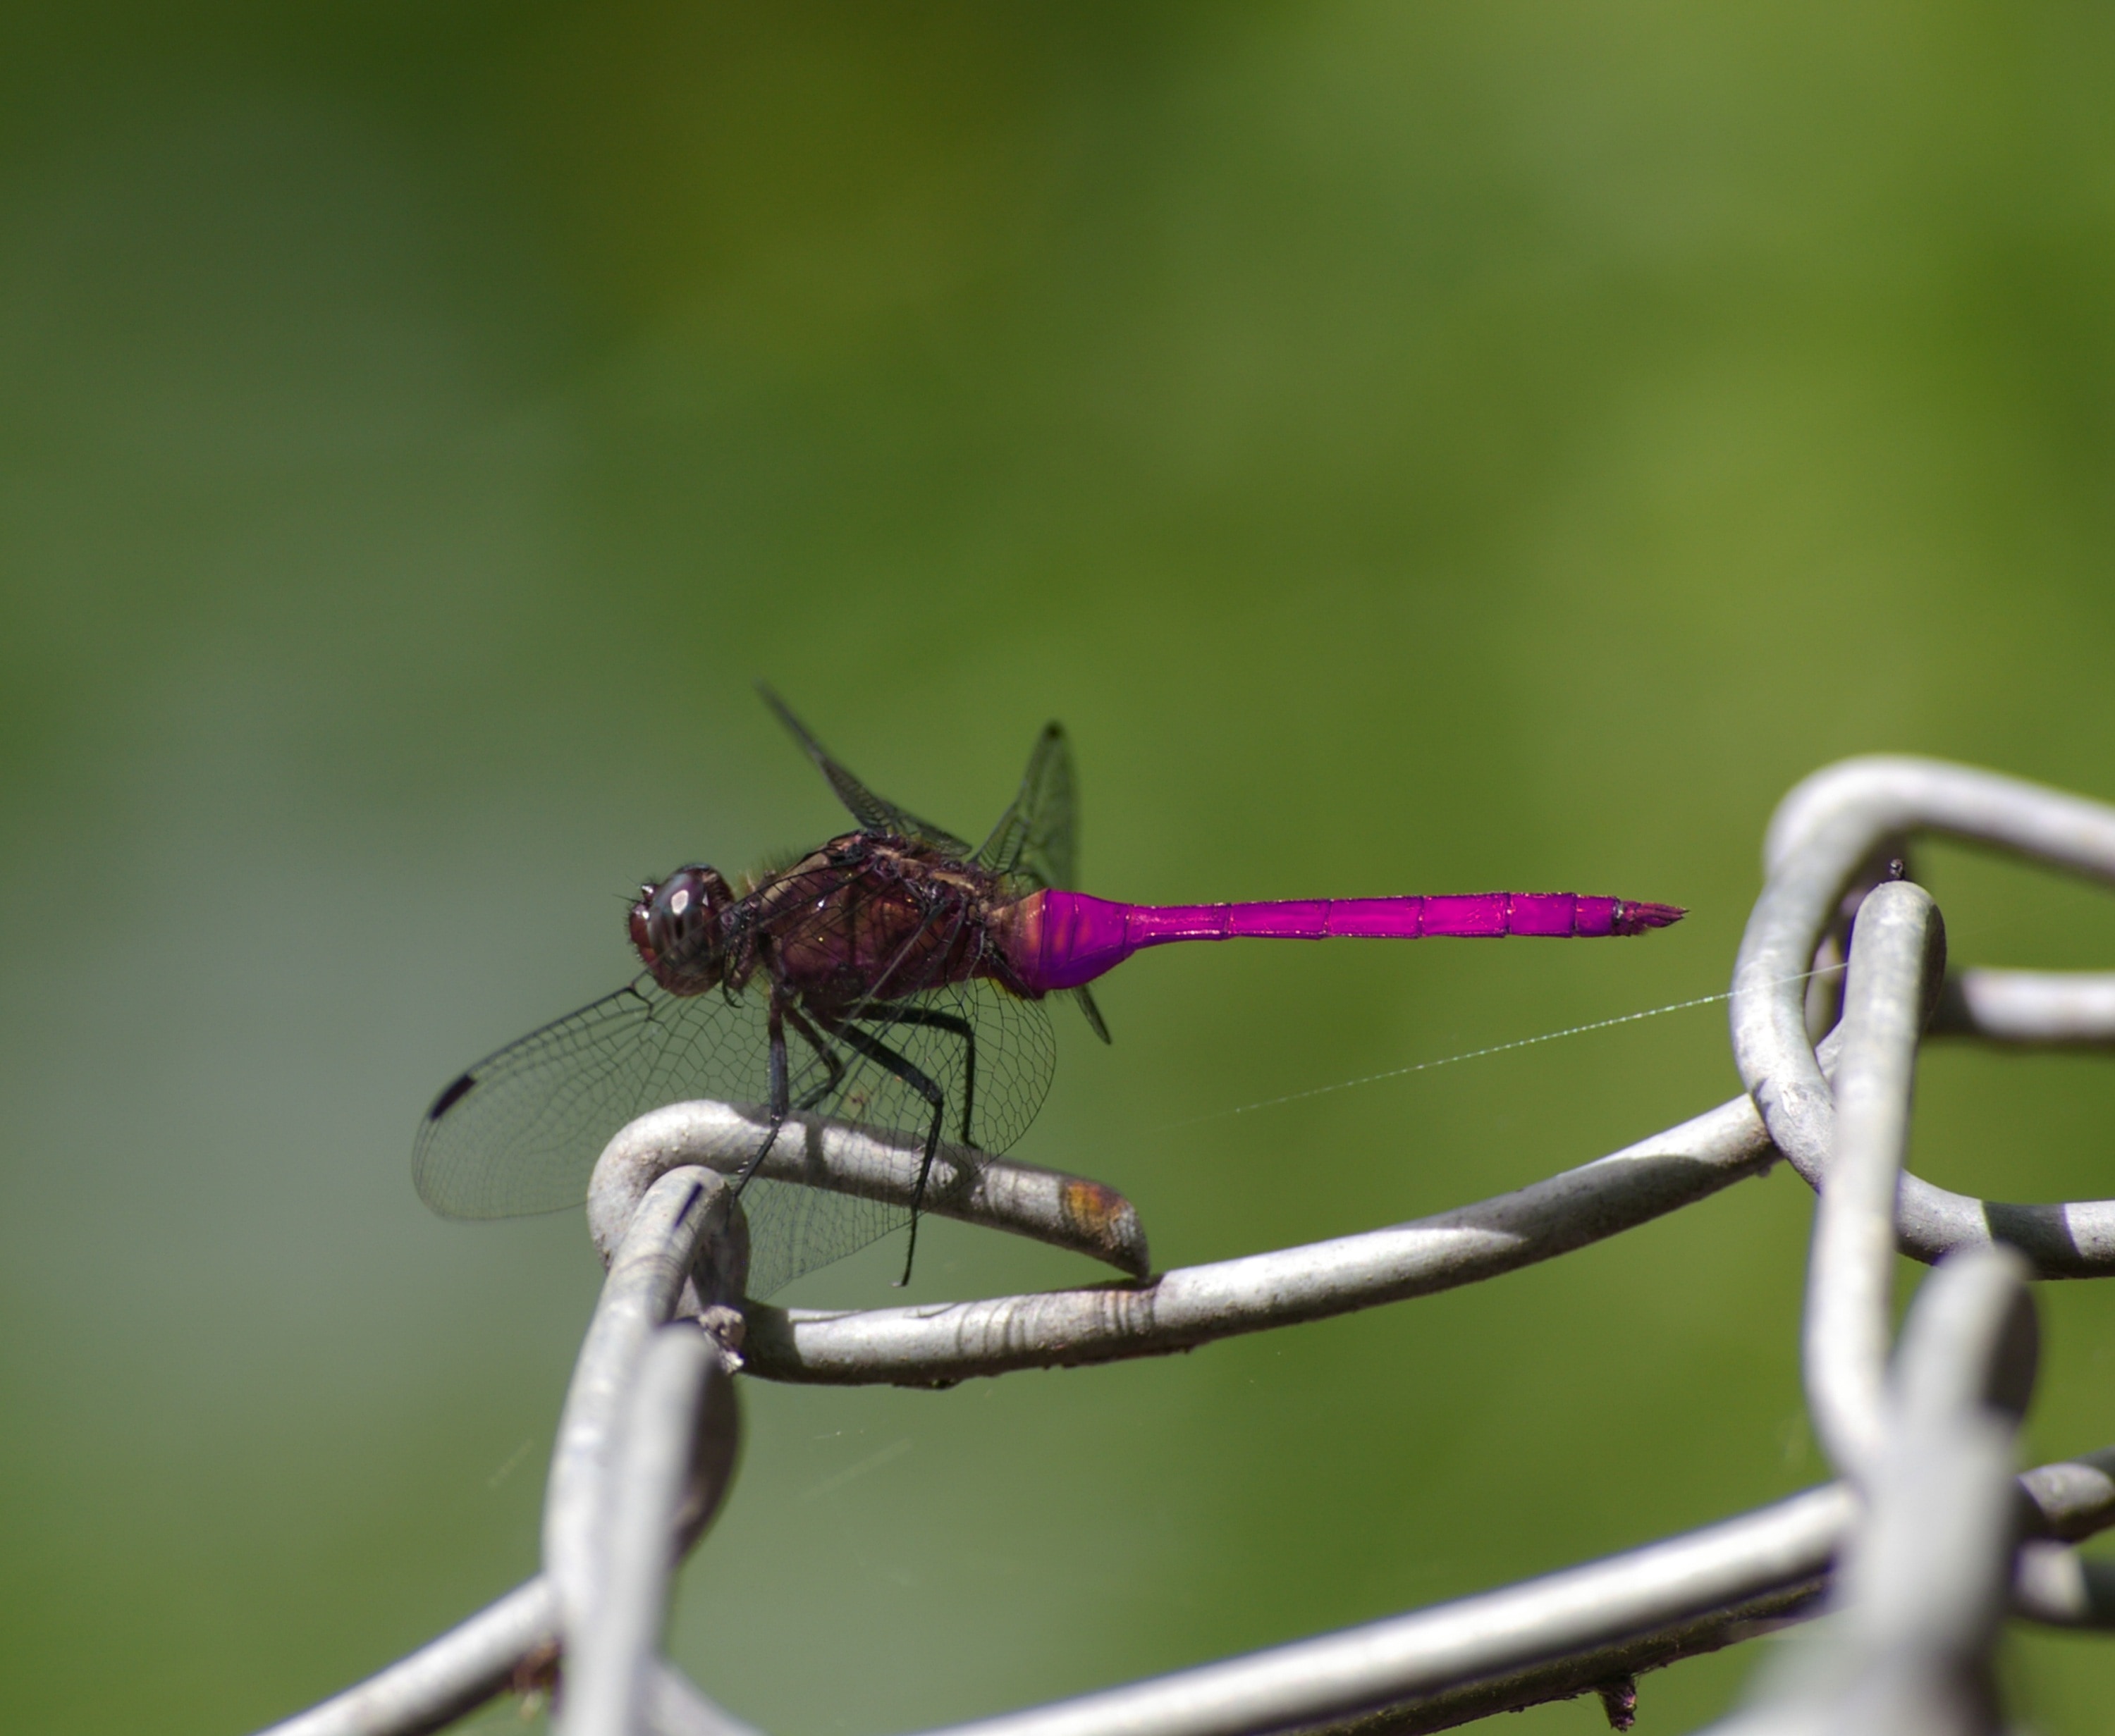 Wildlife, Insect, Dragonfly, Nature, insect, green color